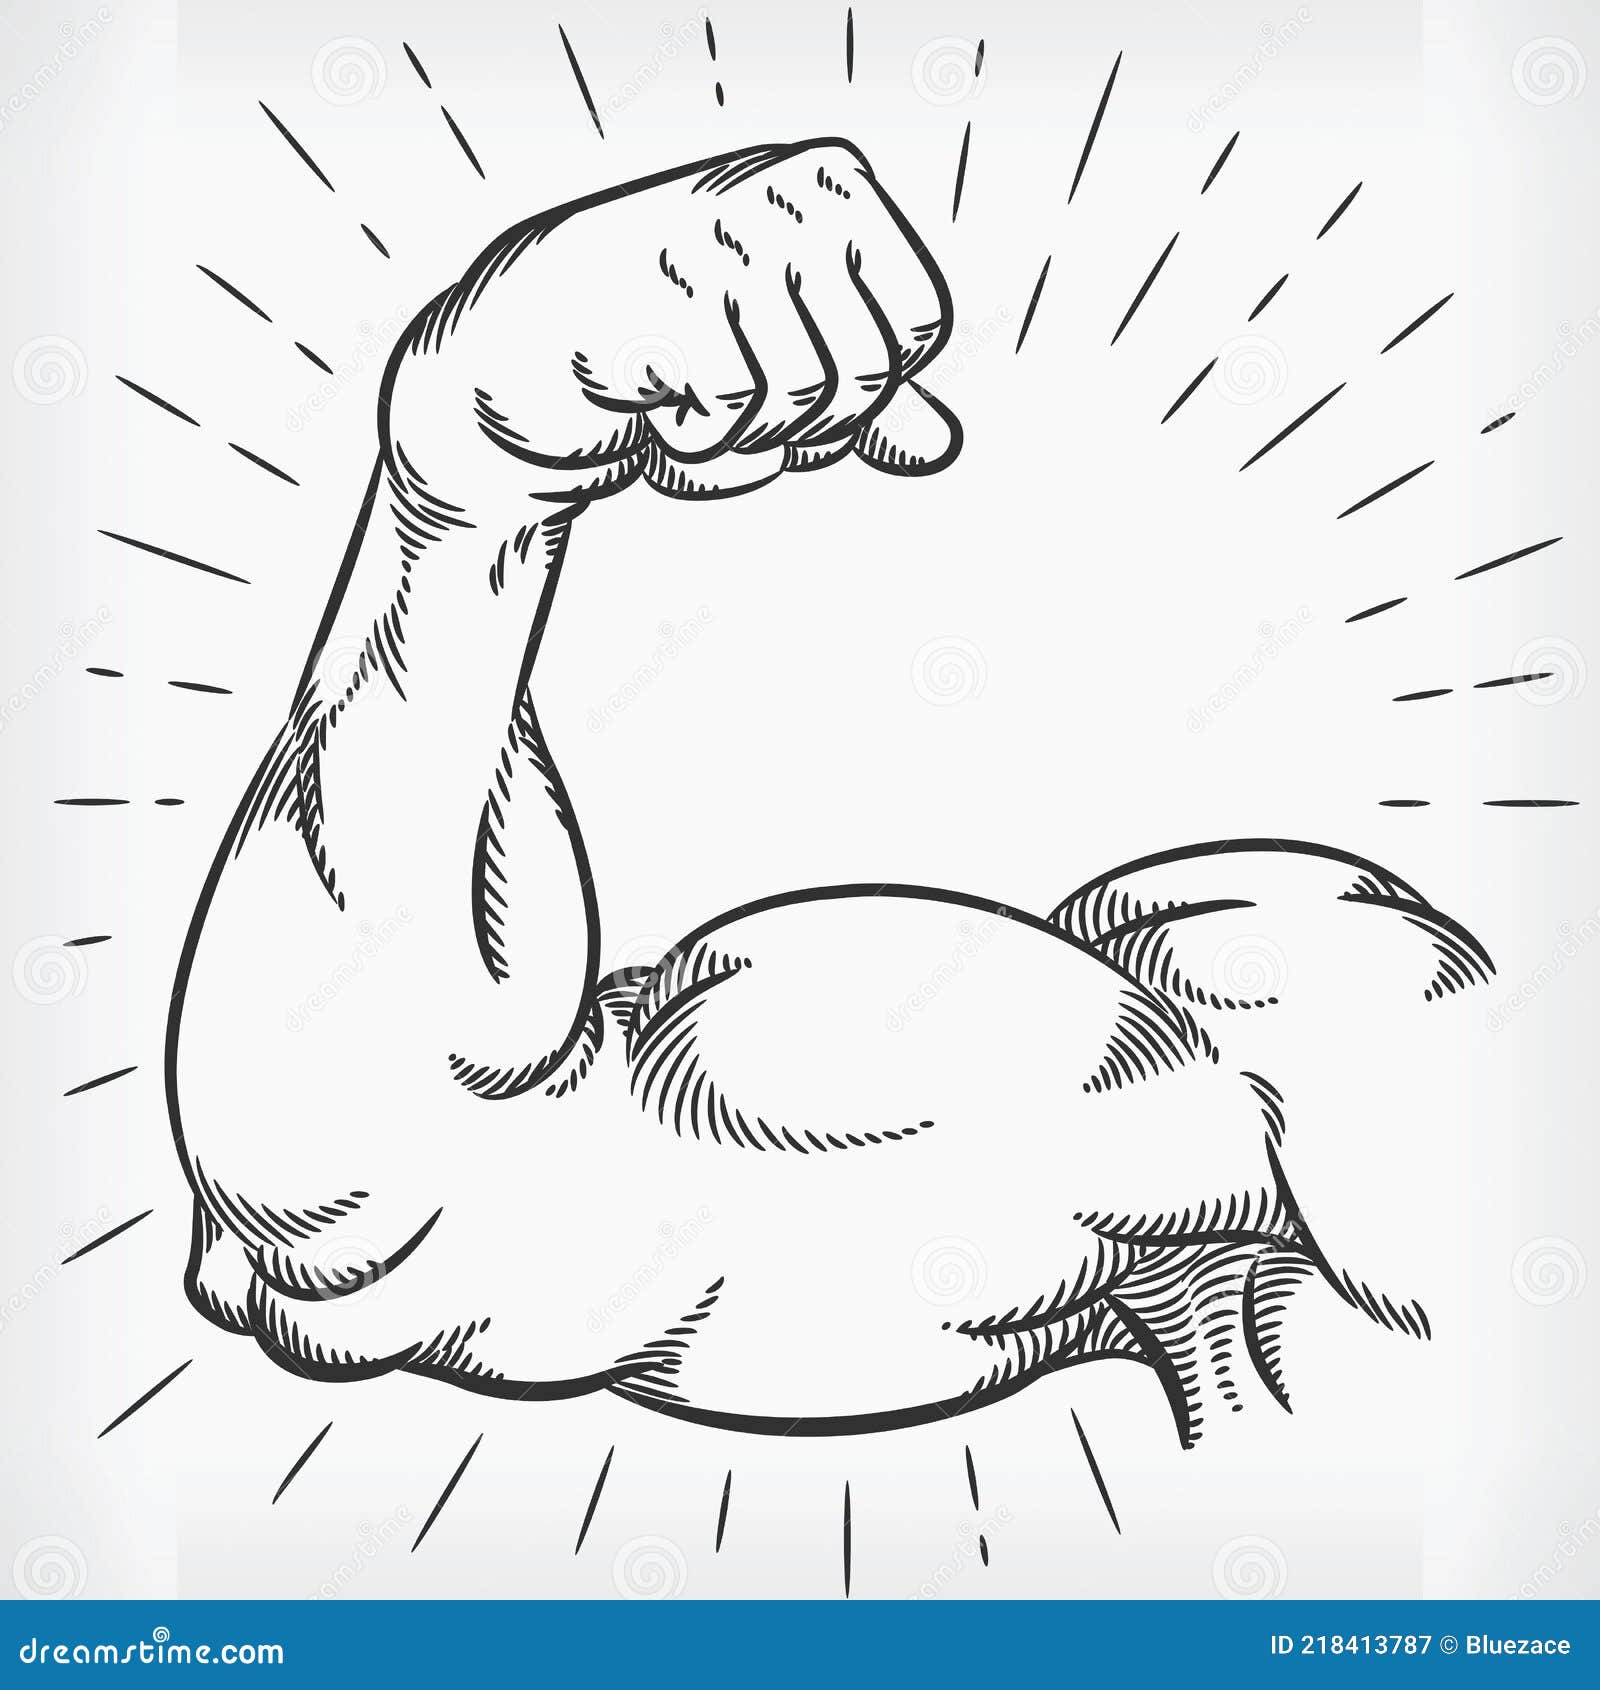 15152 Strong Arms Drawing Images Stock Photos  Vectors  Shutterstock